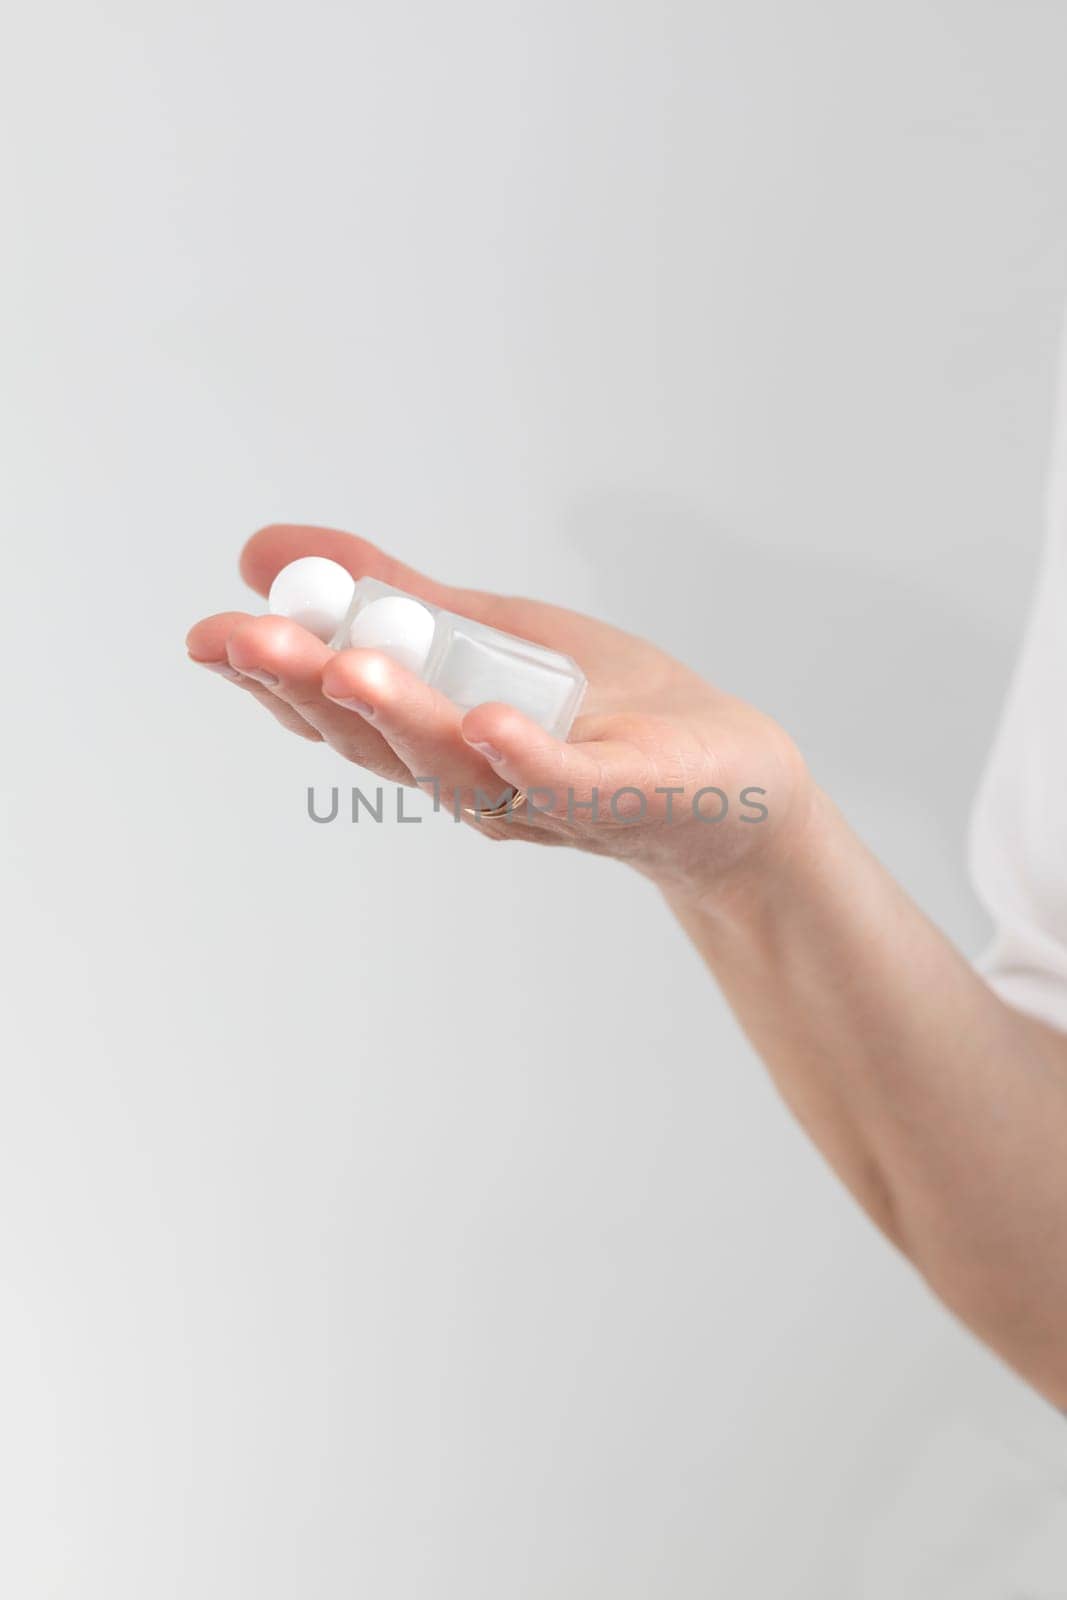 Hand Holds Two Glass Bottles With Lash Lift Lotion For Eyelash Lamination Treatment Procedure. Curling, Staining, Extension Procedures For Lashes. Vertical Plane, Closeup.